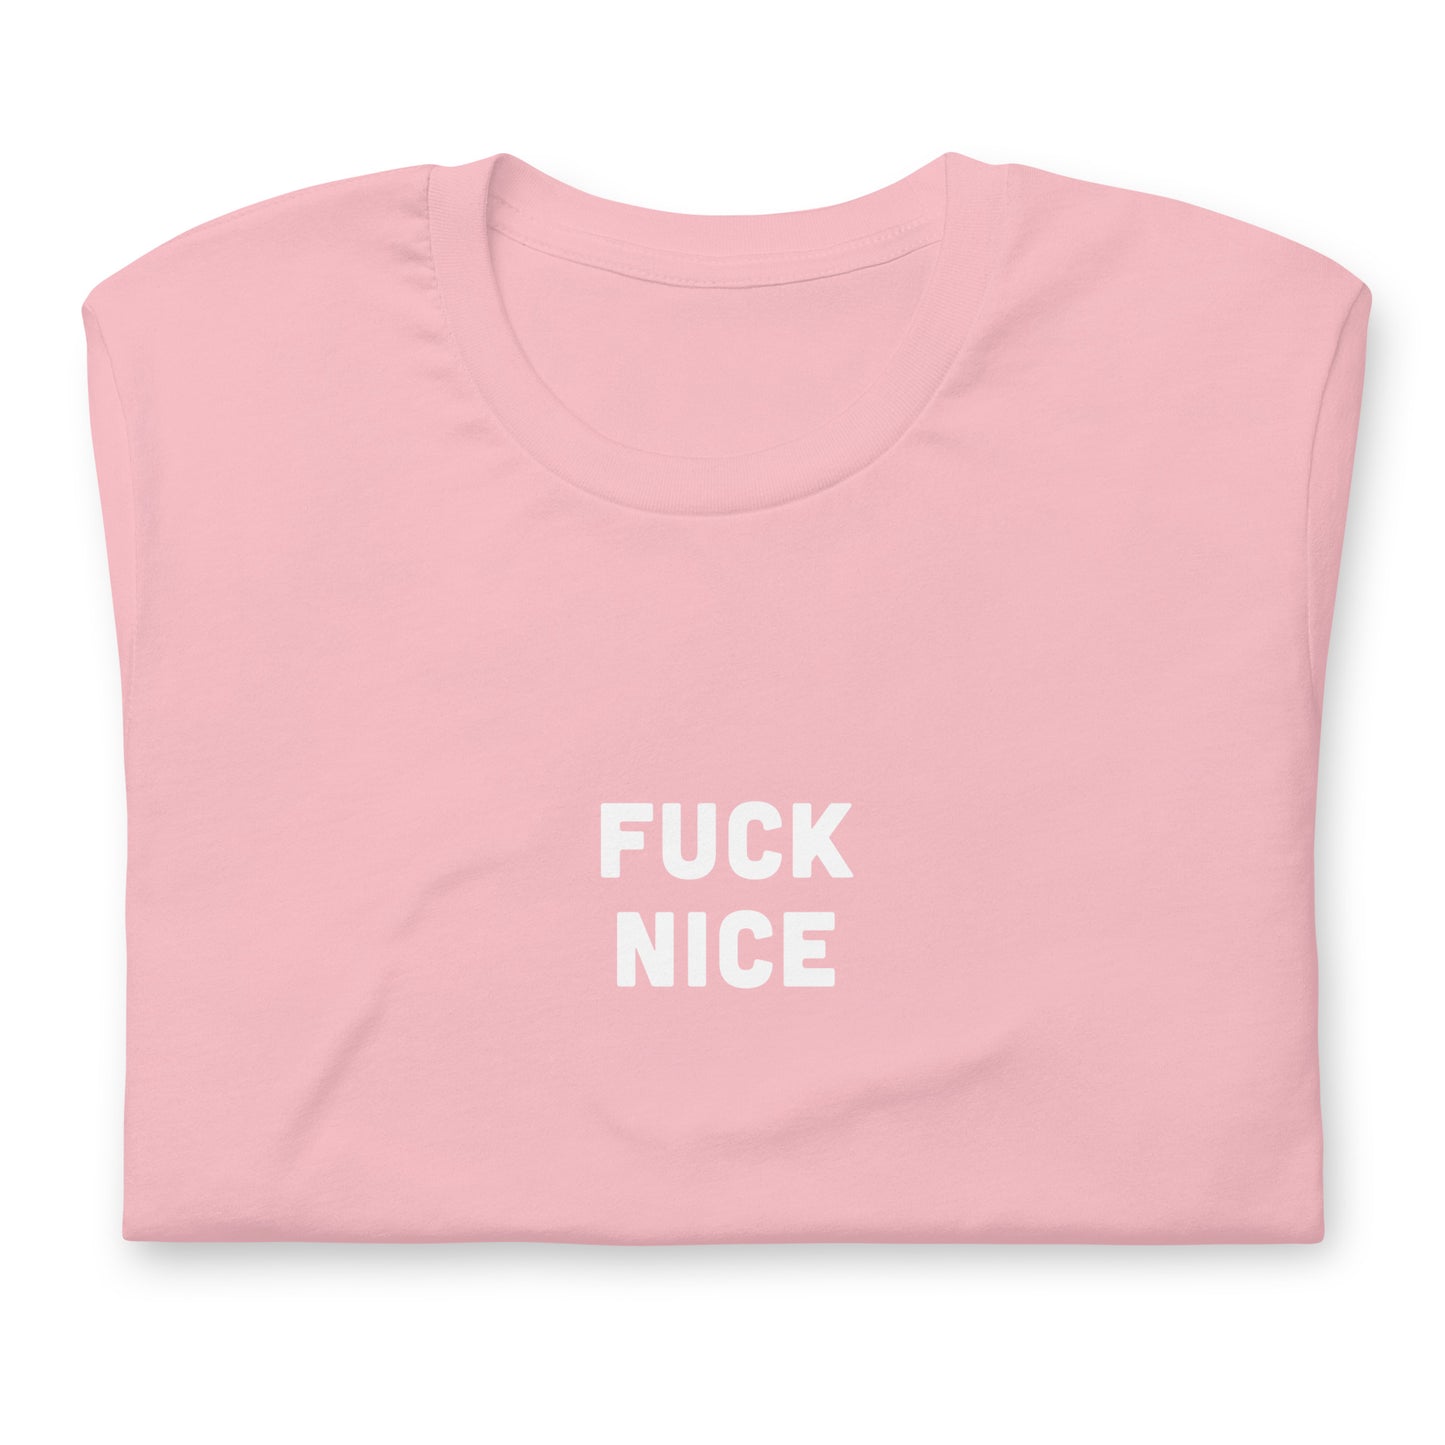 Fuck Nice T-Shirt Size 2XL Color Forest